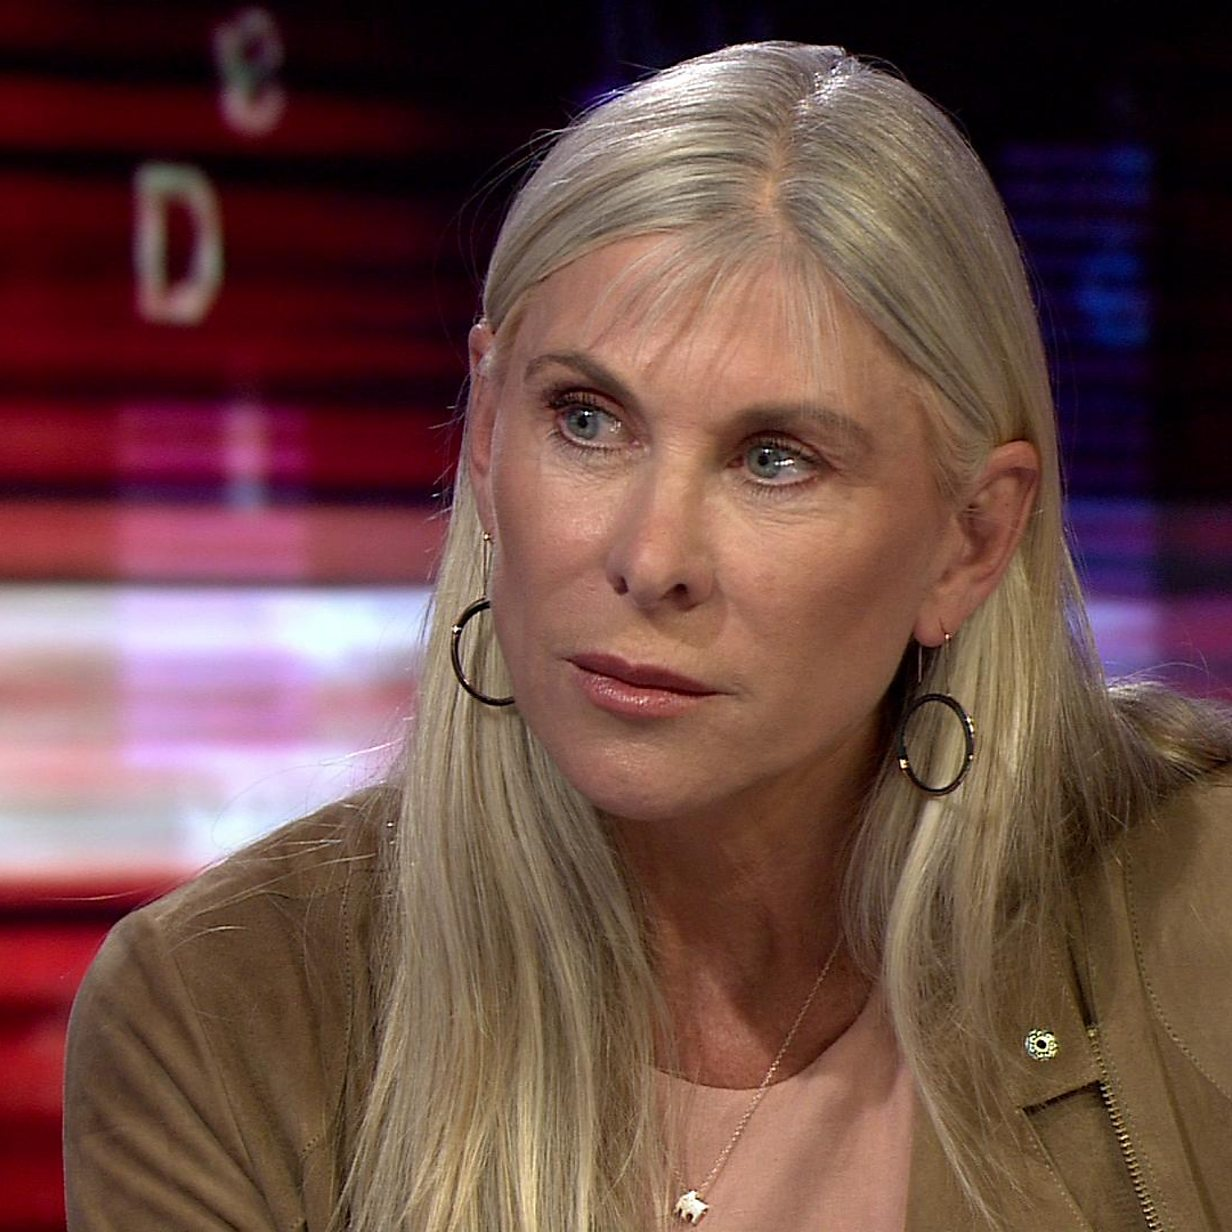 British Olympic swimming medallist Sharron Davies welcomed the World Athletics decision over trans athletes, claiming other sports must now follow ©YouTube